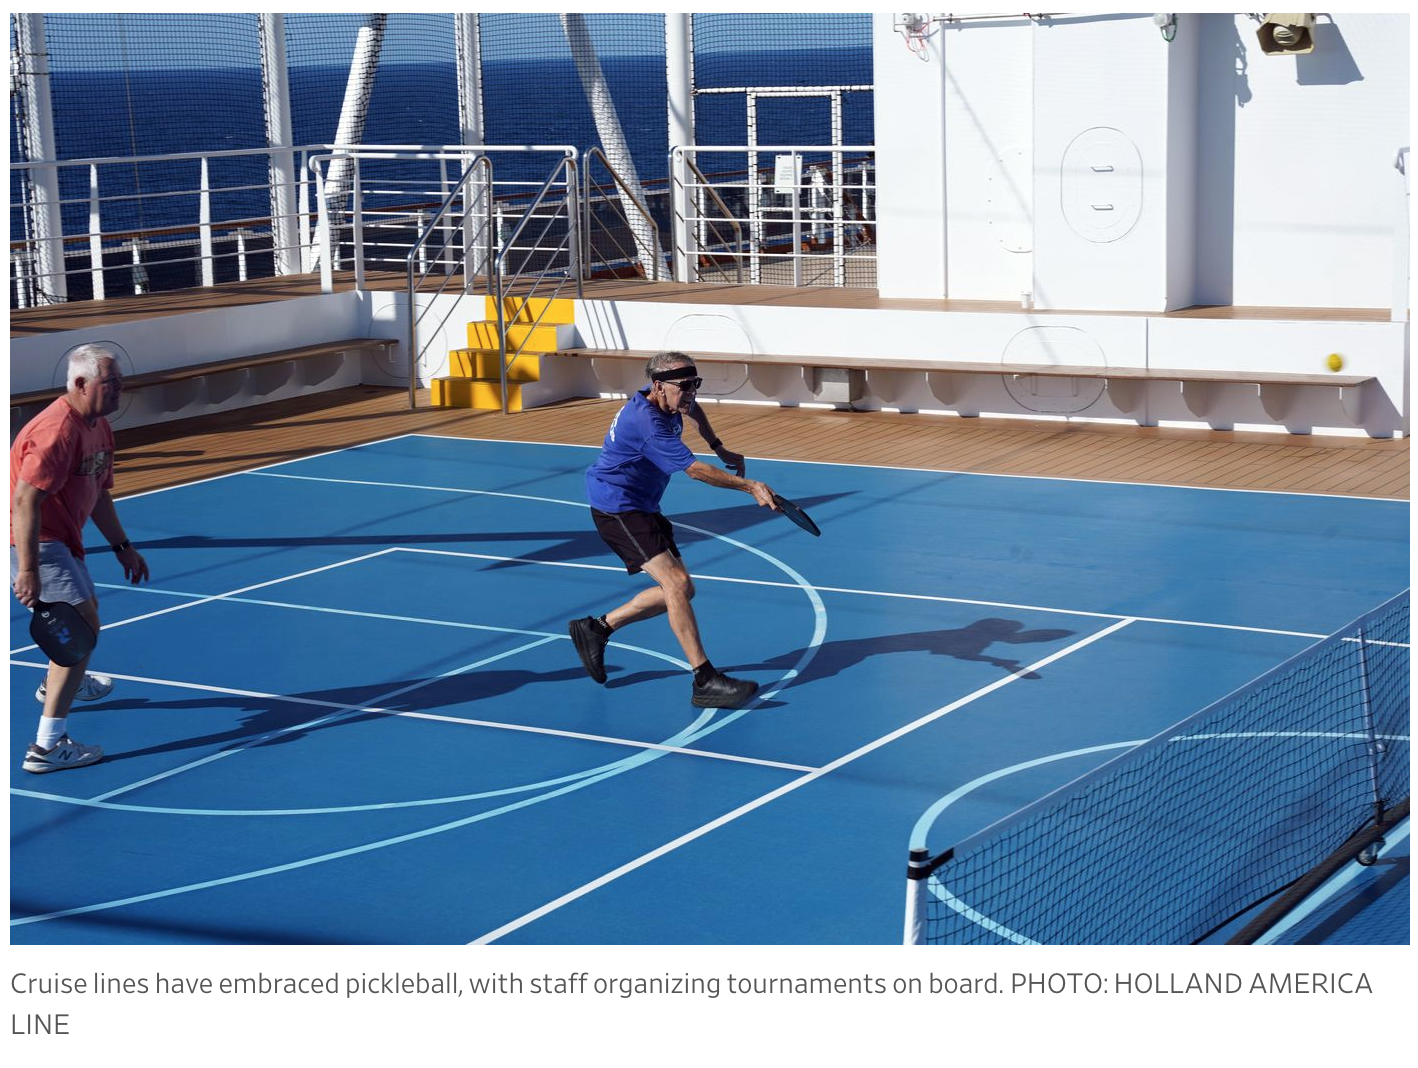 Move Over, Tennis And Golf. Networks And Brands Are Cashing In On Pickleball